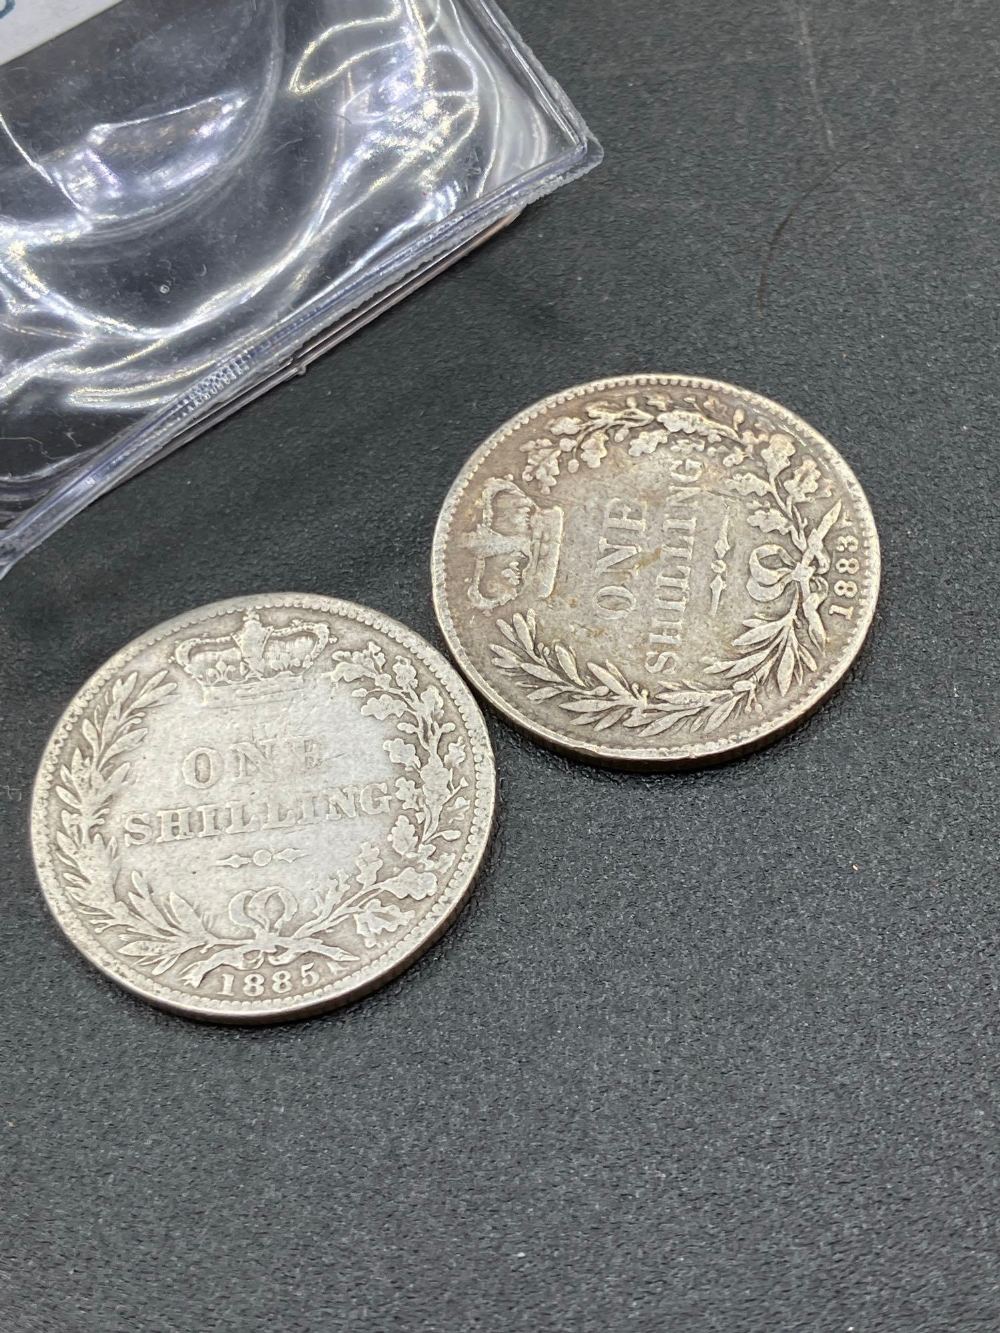 1983 & 1885 shillings - Image 2 of 2